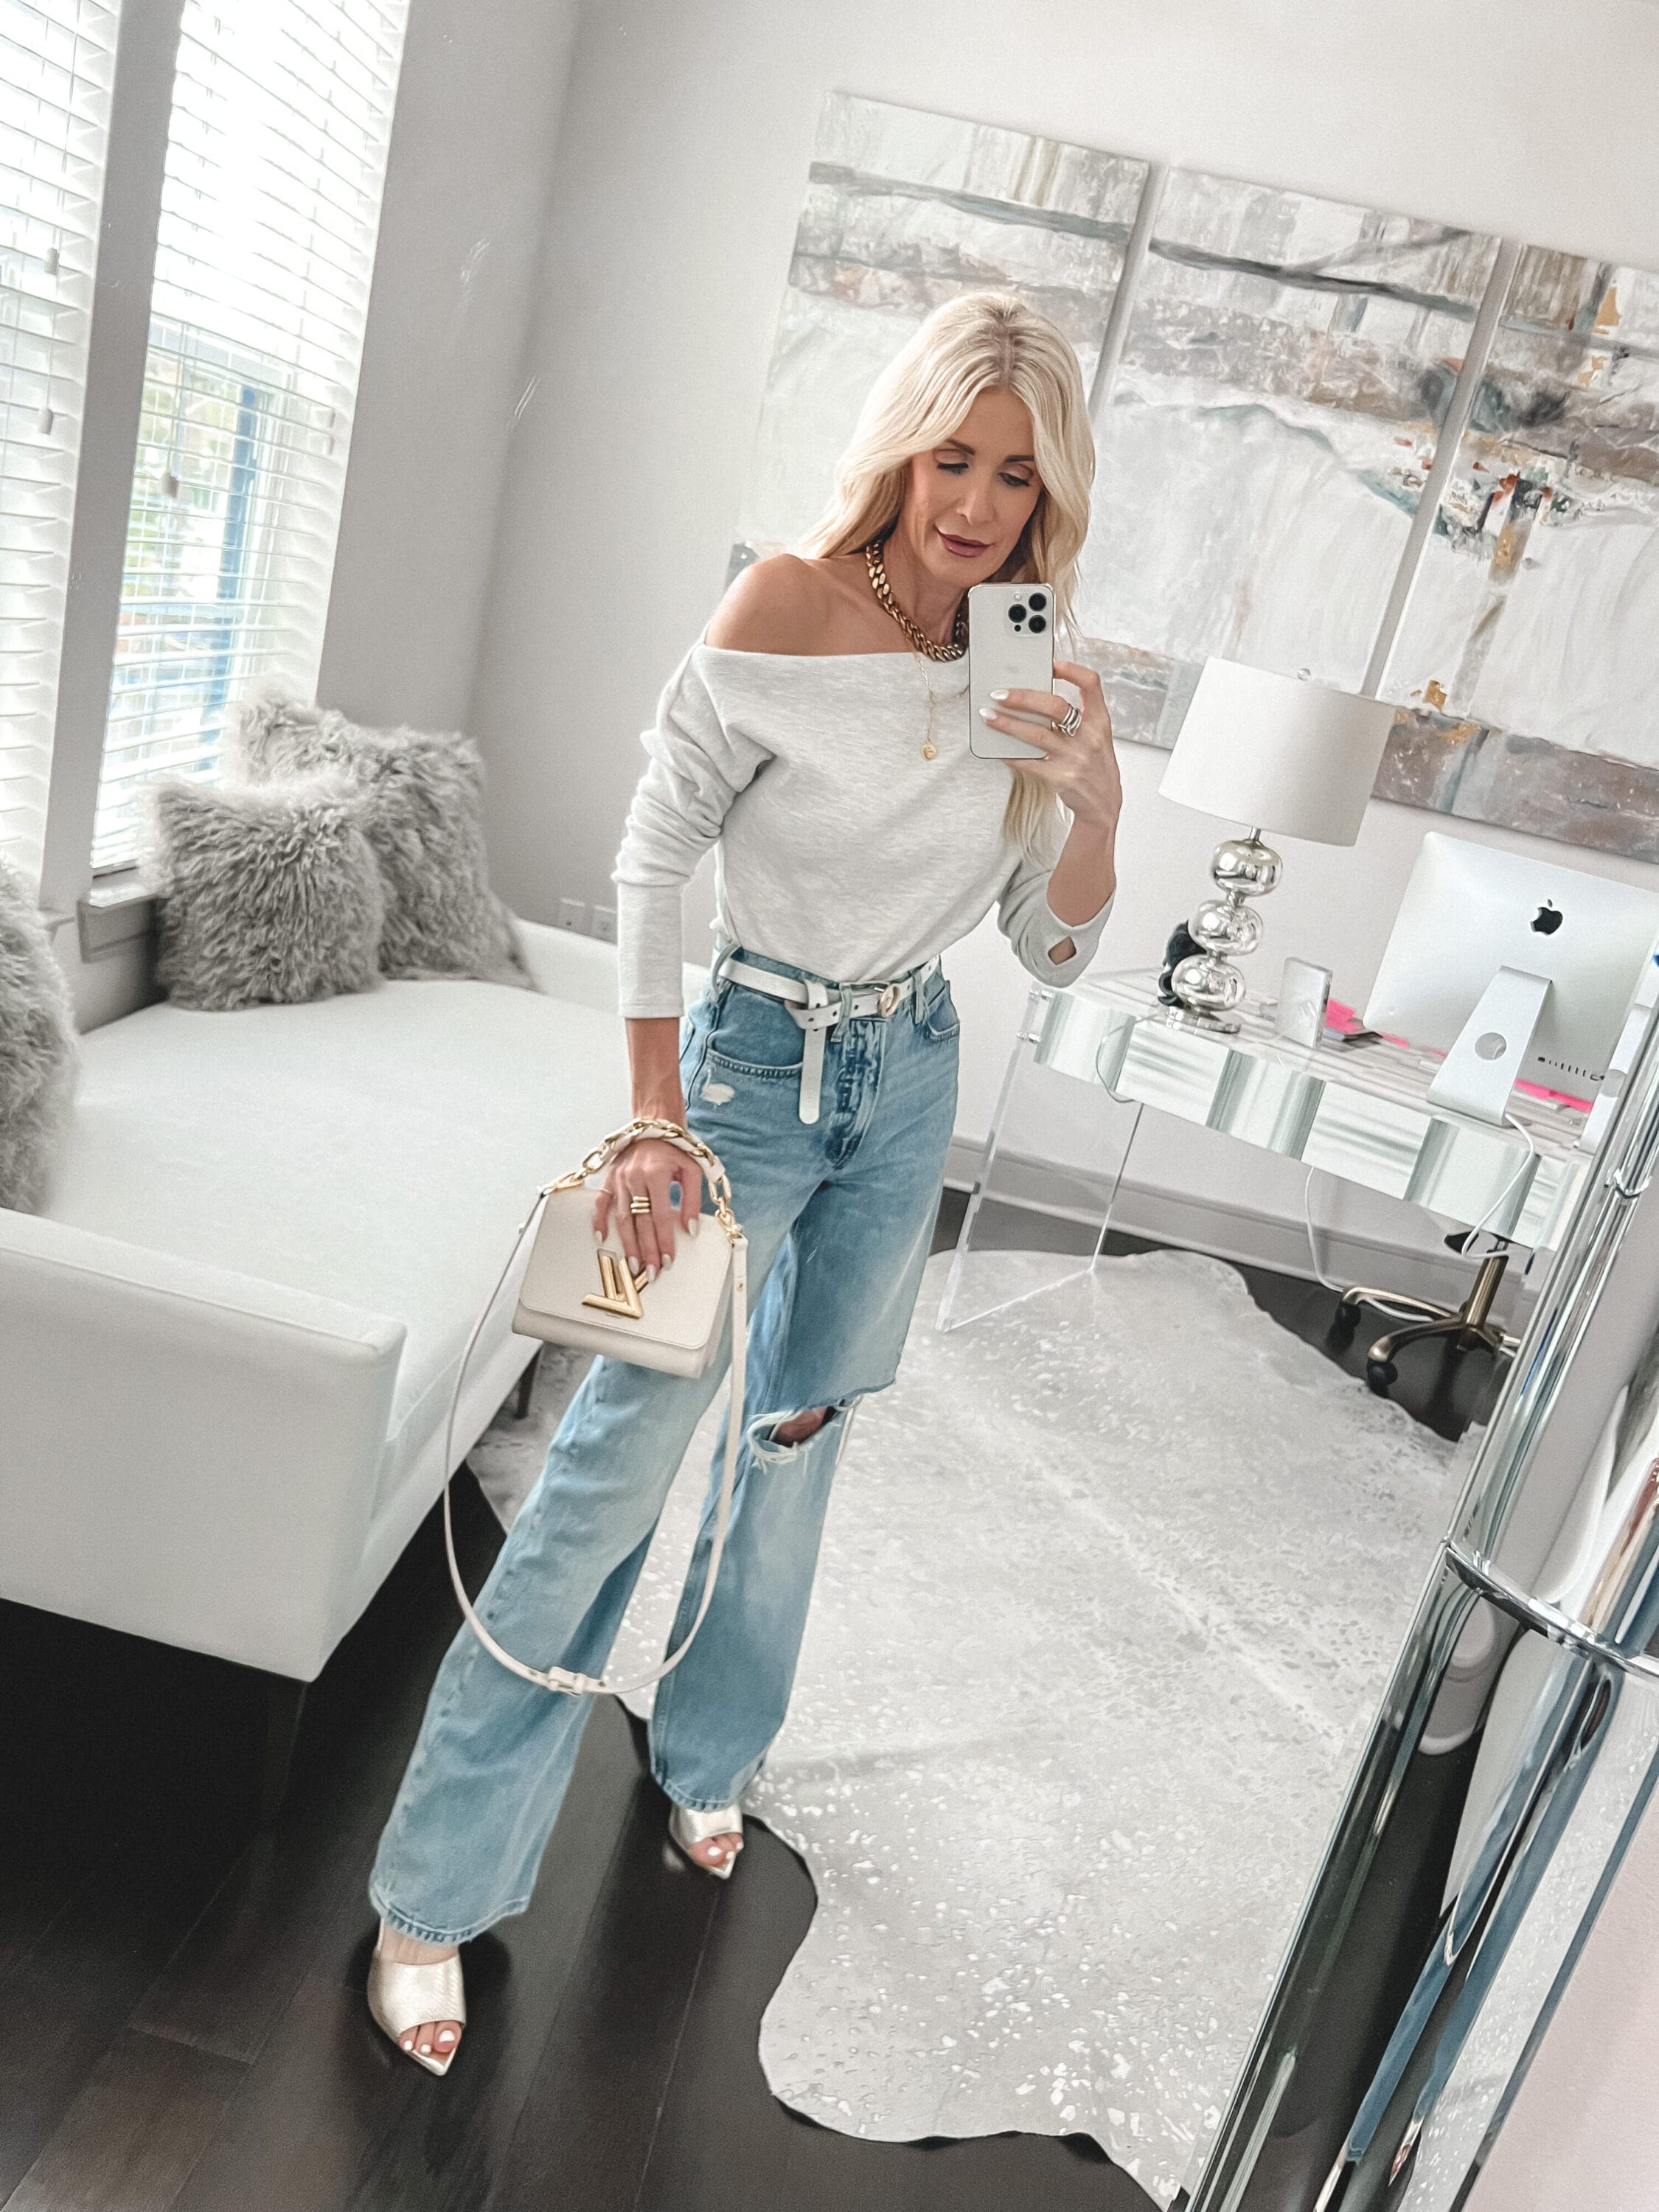 Over 40 Dallas fashion influencer wearing wide-leg jeans as one of the top spring denim trends of 2023.